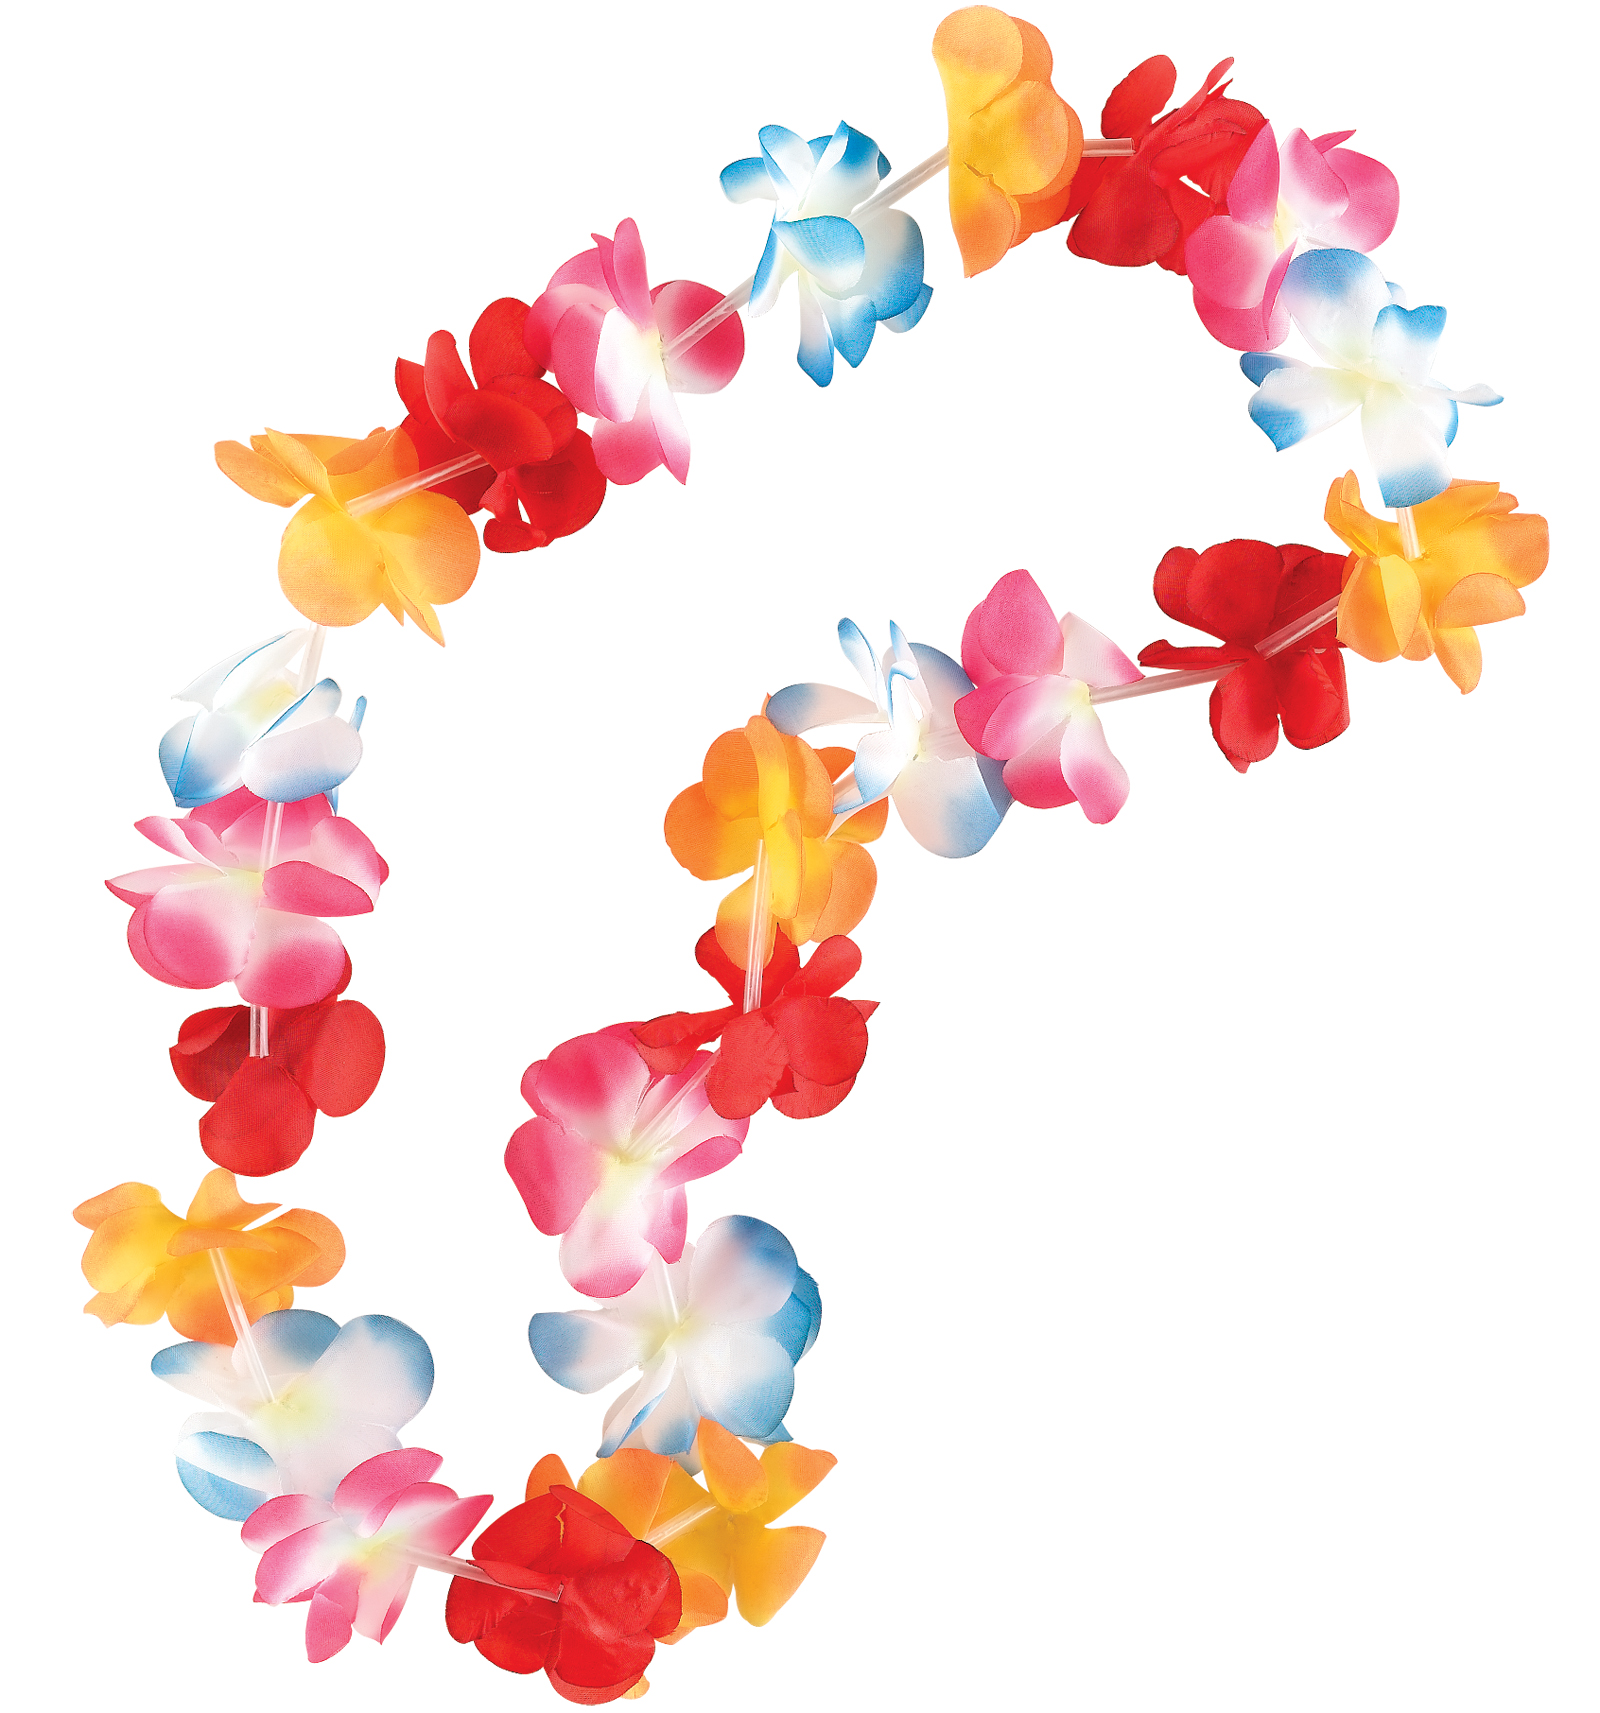 Lei thepartyworks free image. Necklace clipart flower necklace